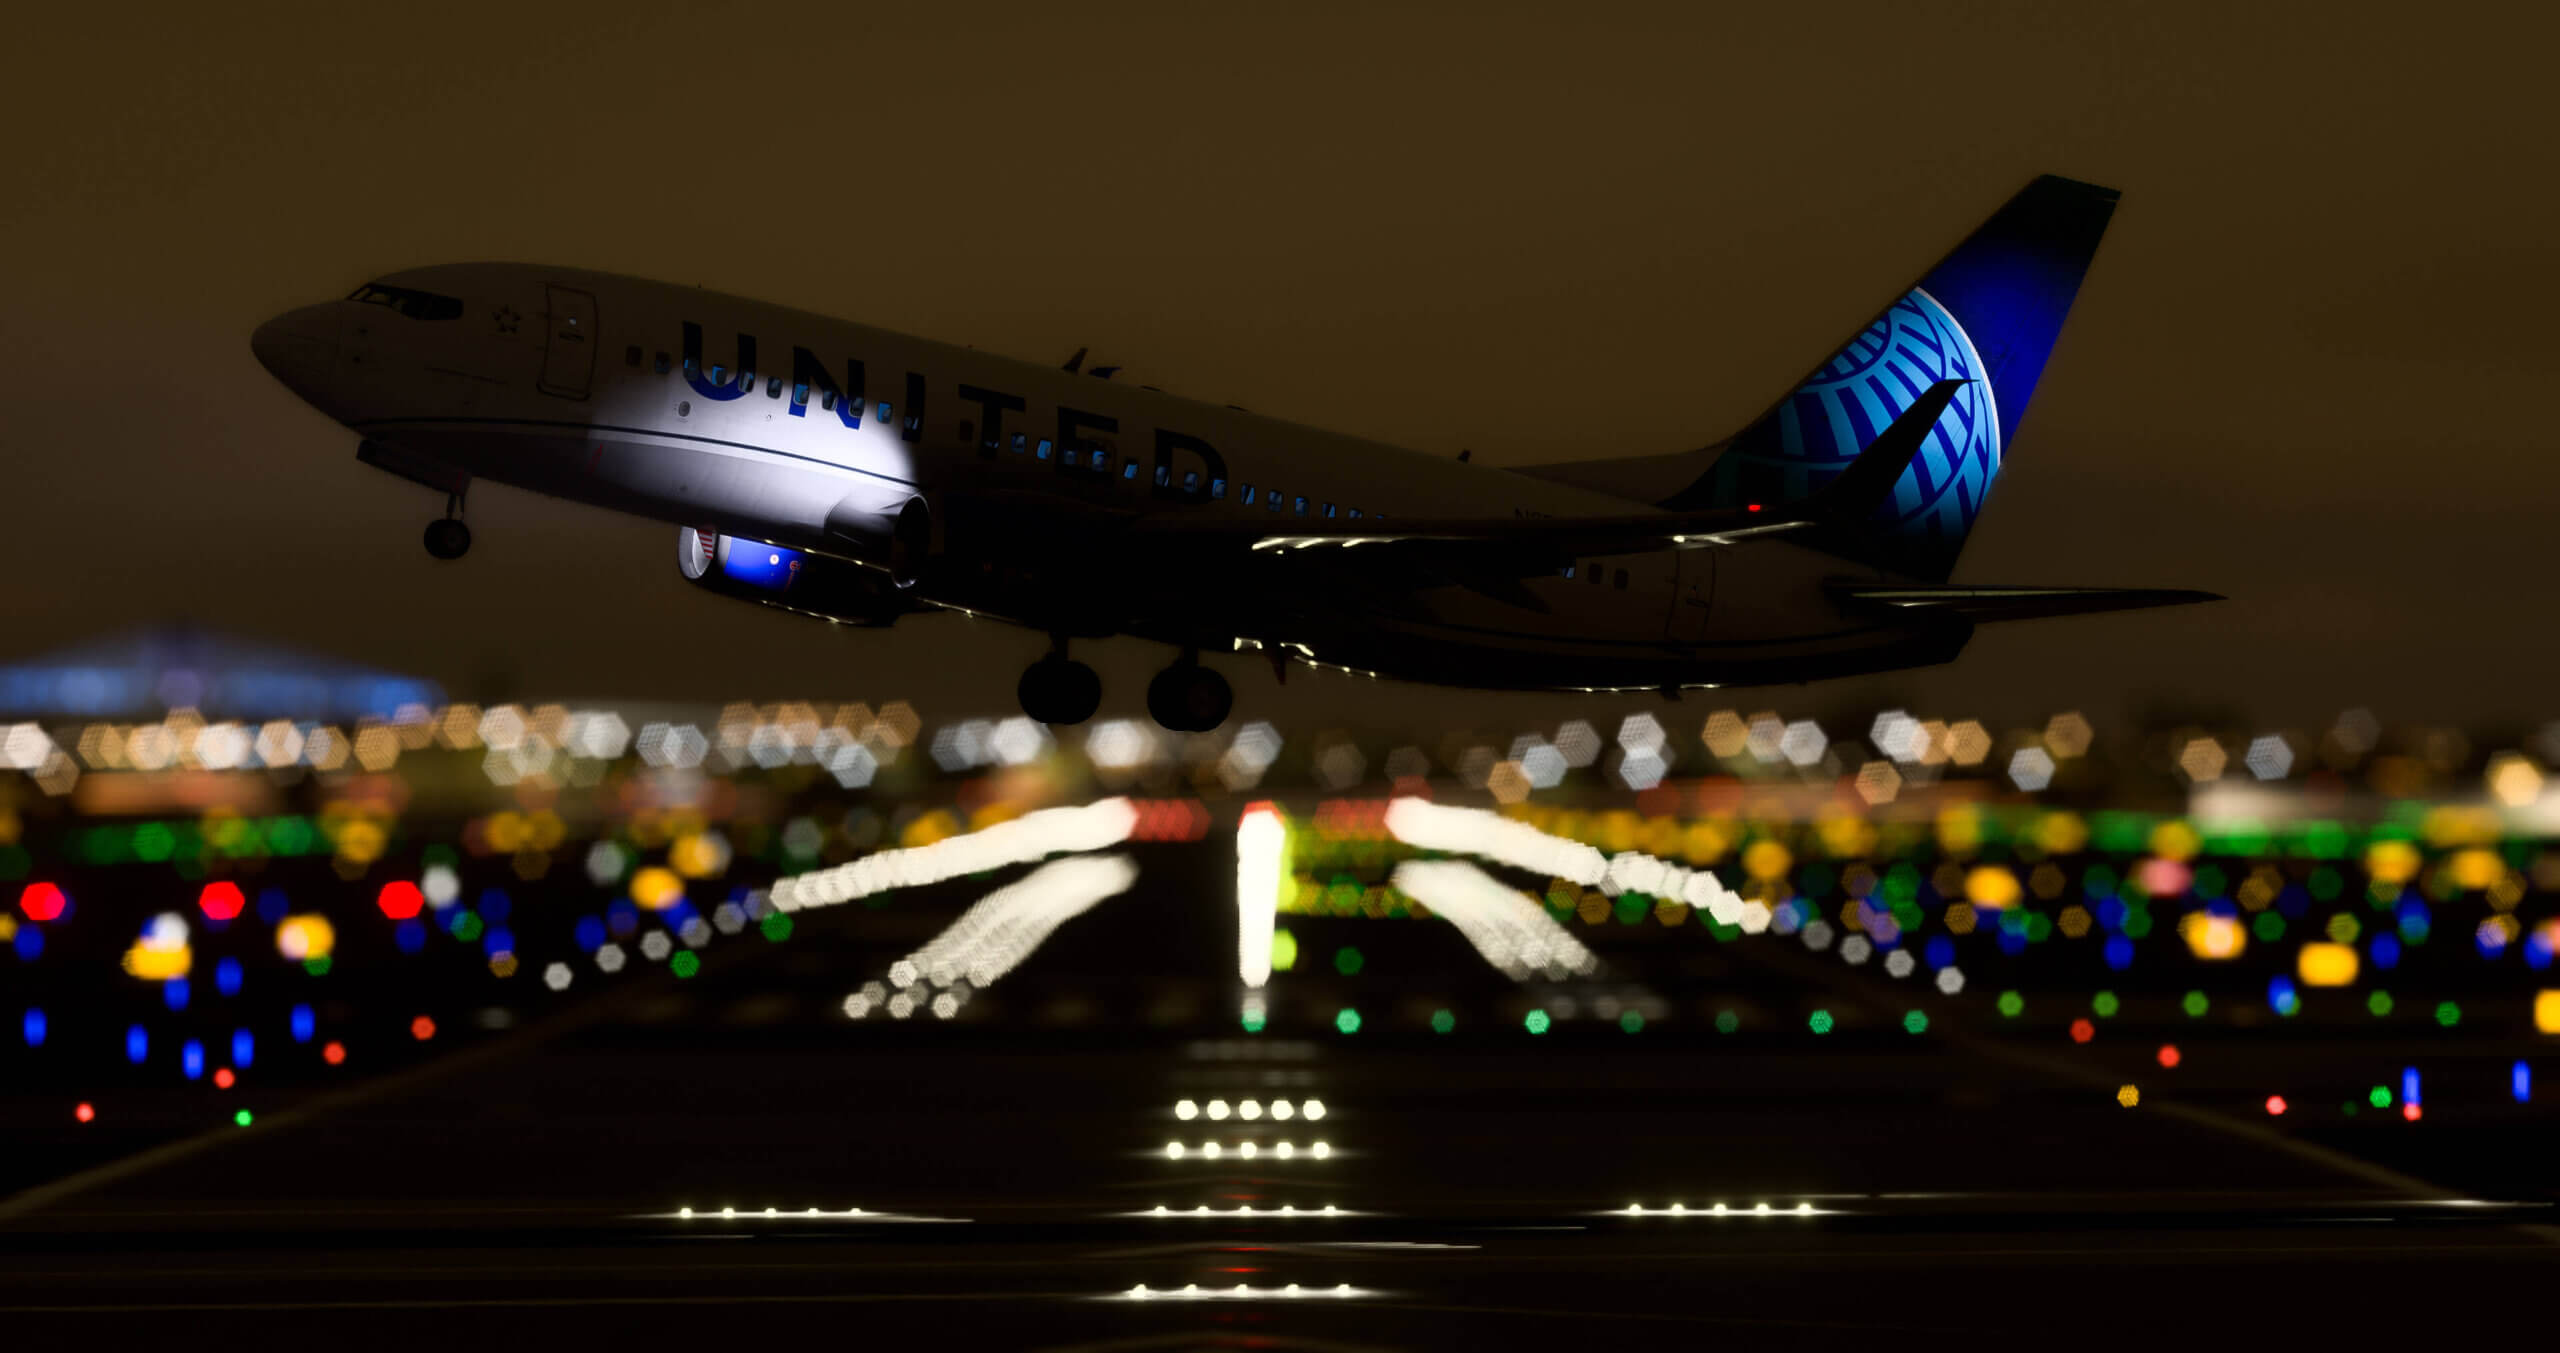 A United Airlines Boeing 737 lands at night